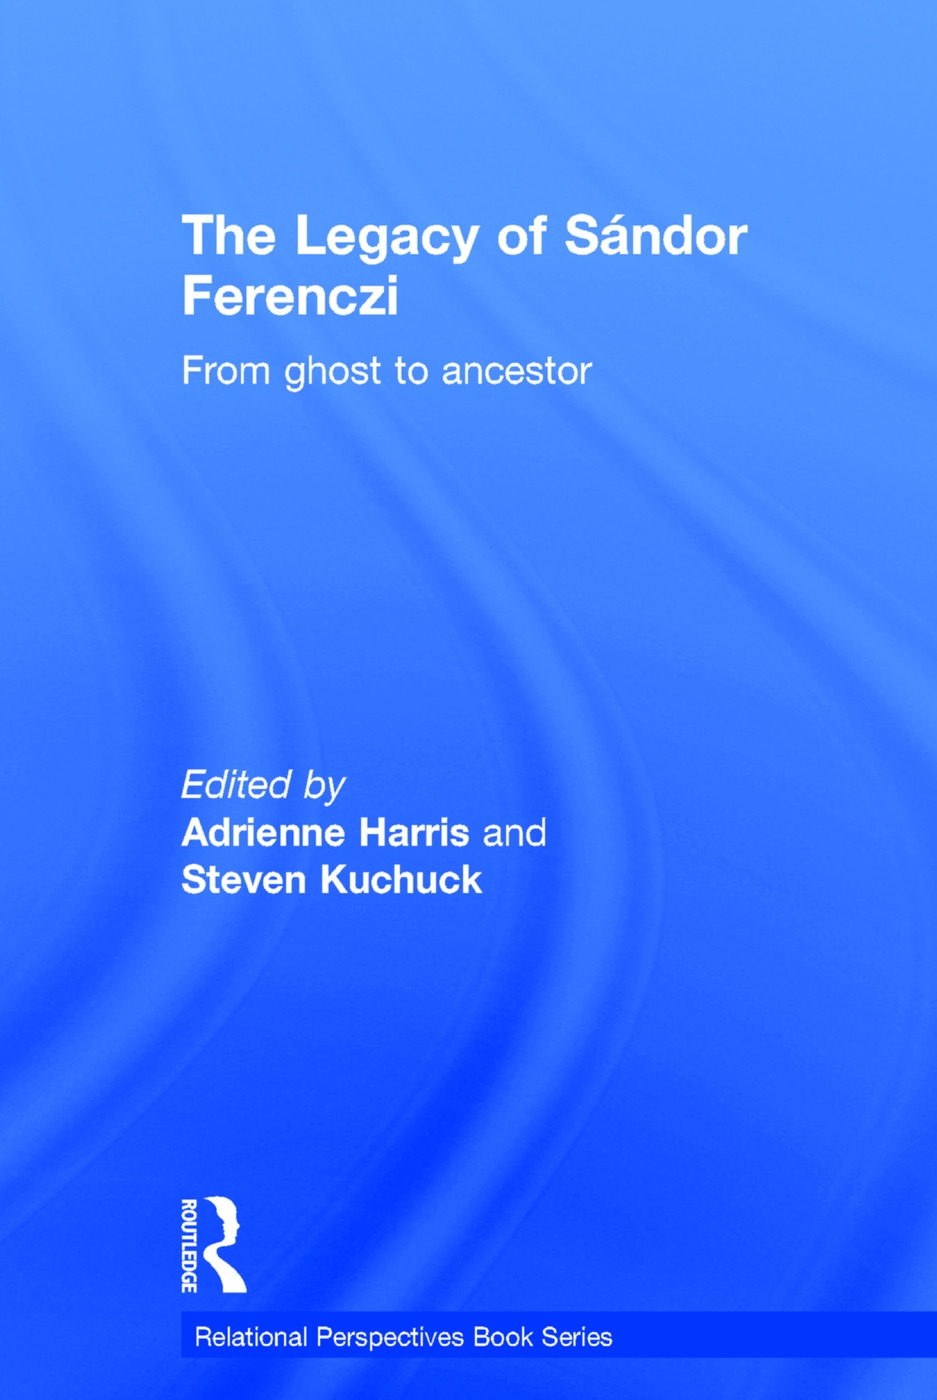 The Legacy of Sandor Ferenczi: From Ghost to Ancestor